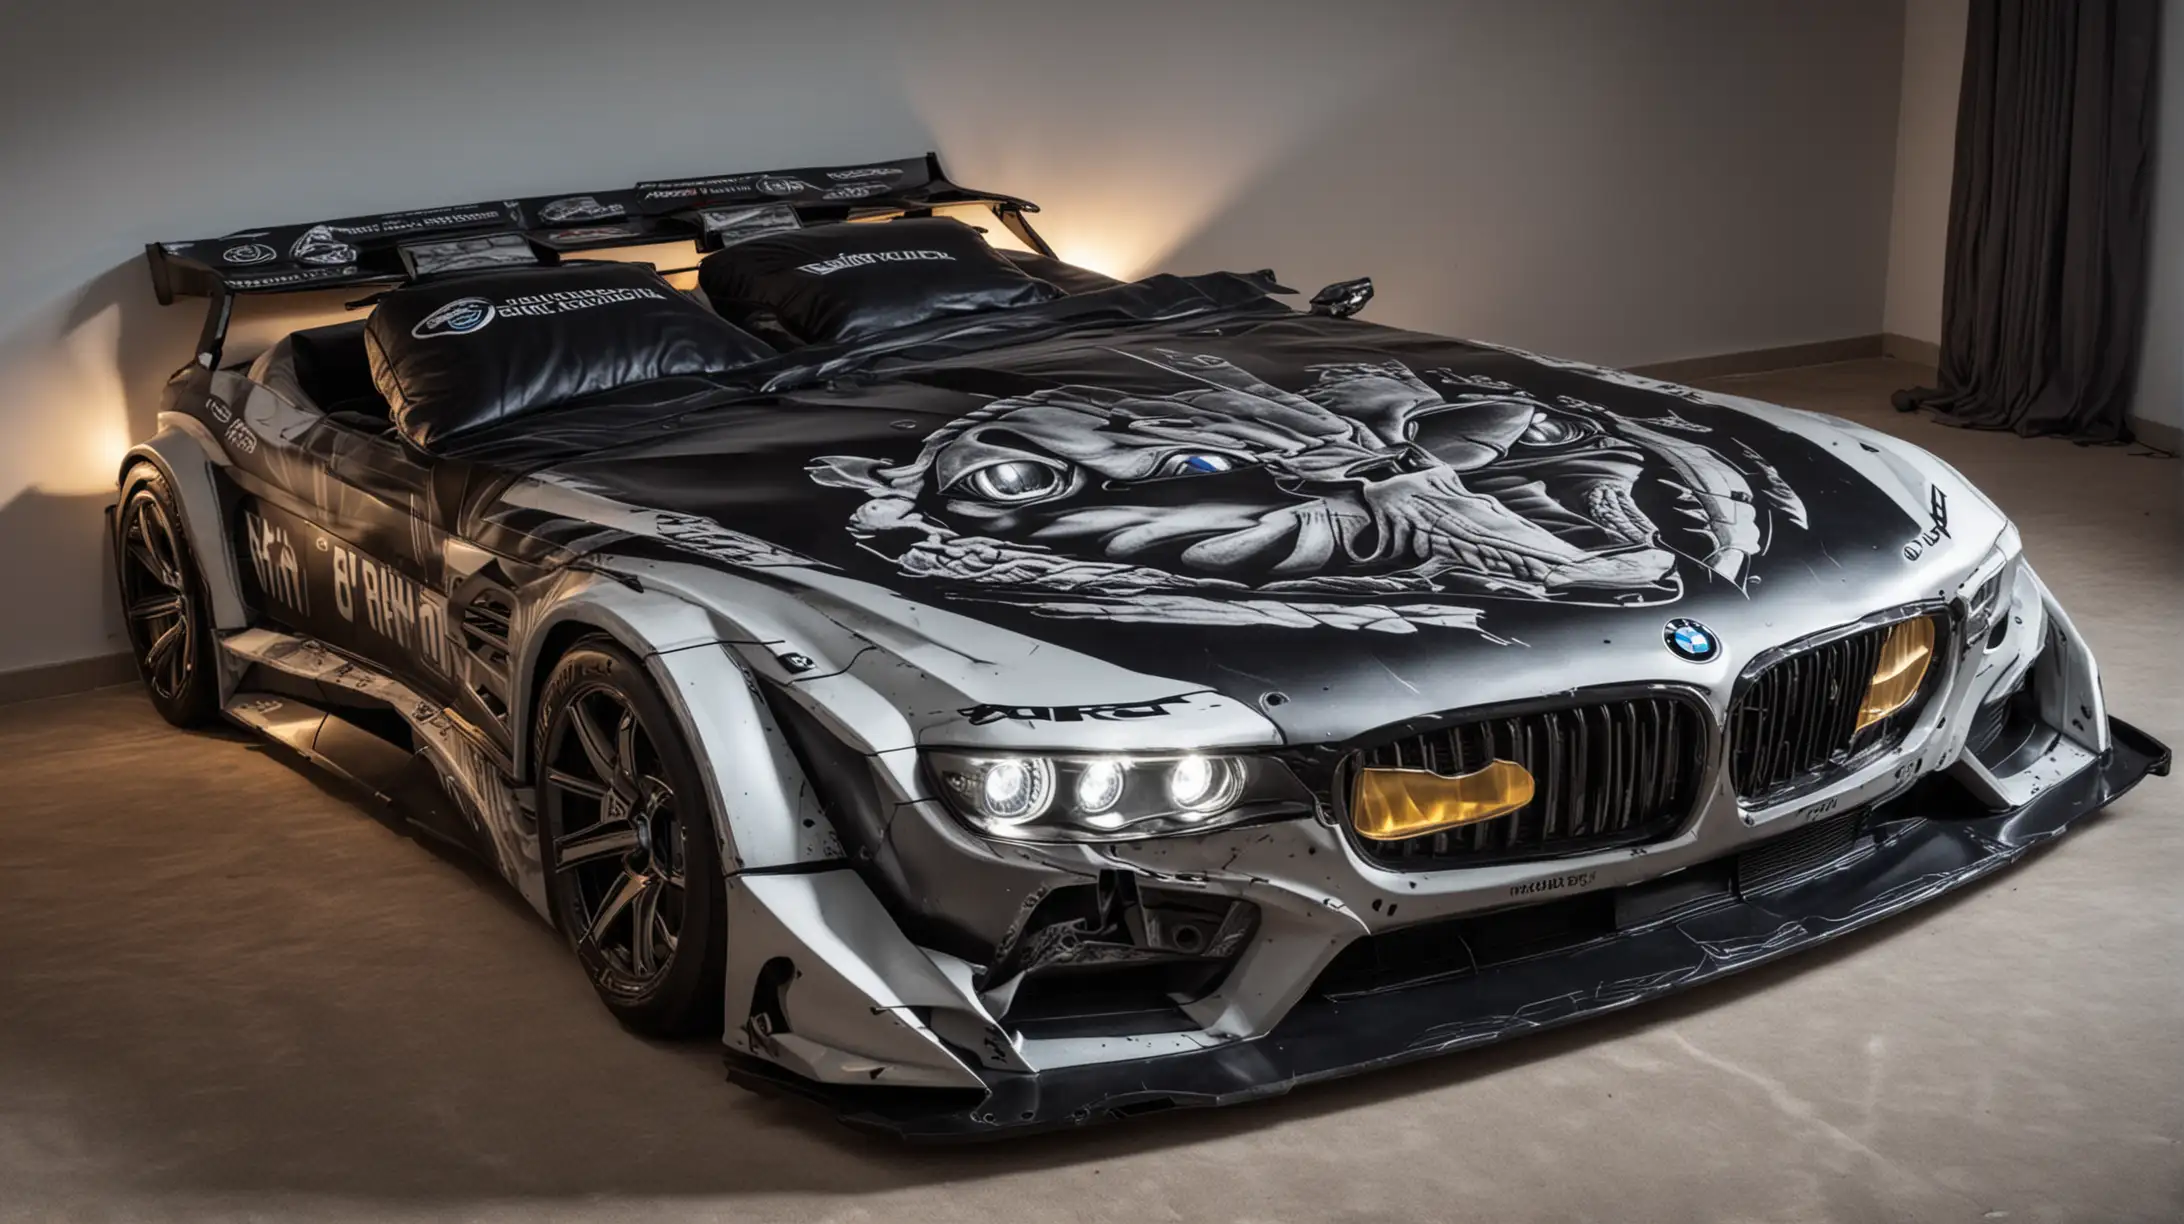 Double bed in the shape of a BMW car with headlights on and graphics of an evil and good king cobra